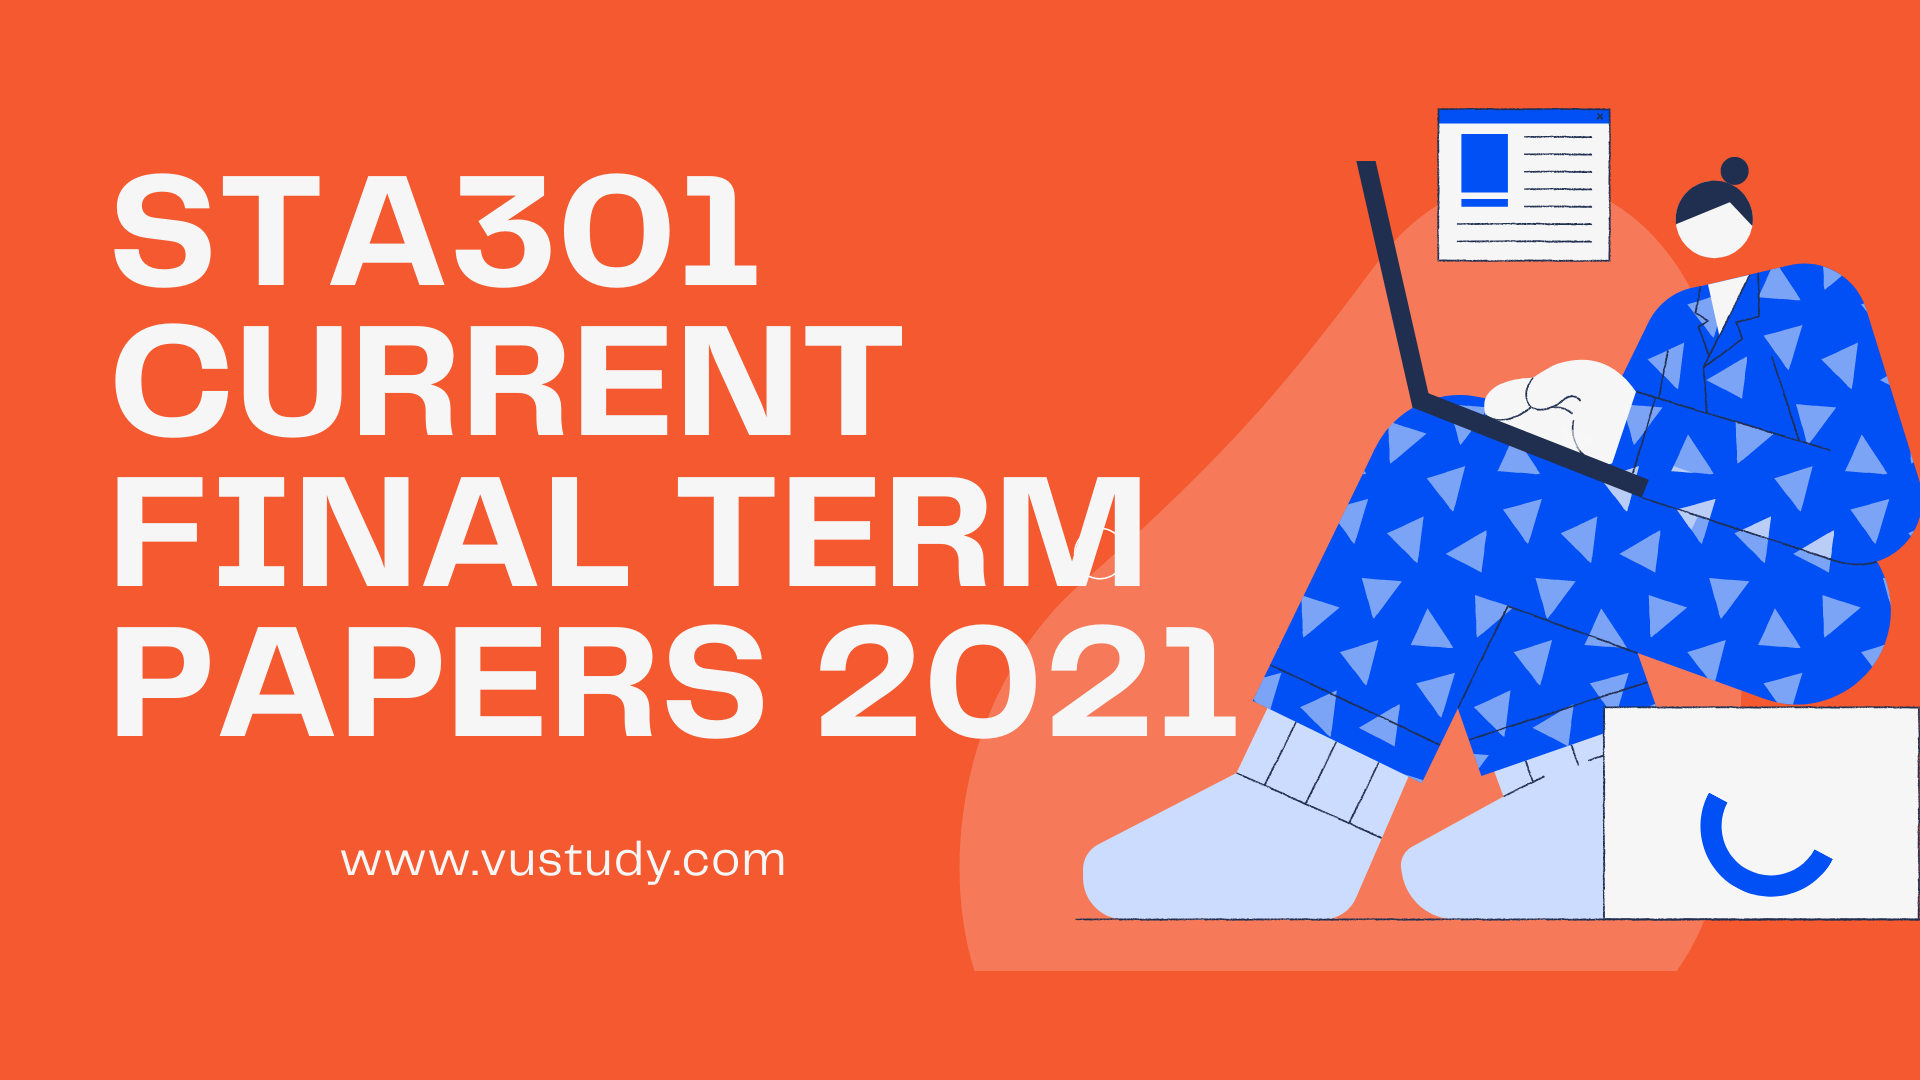 STA301 Final term papers 2021